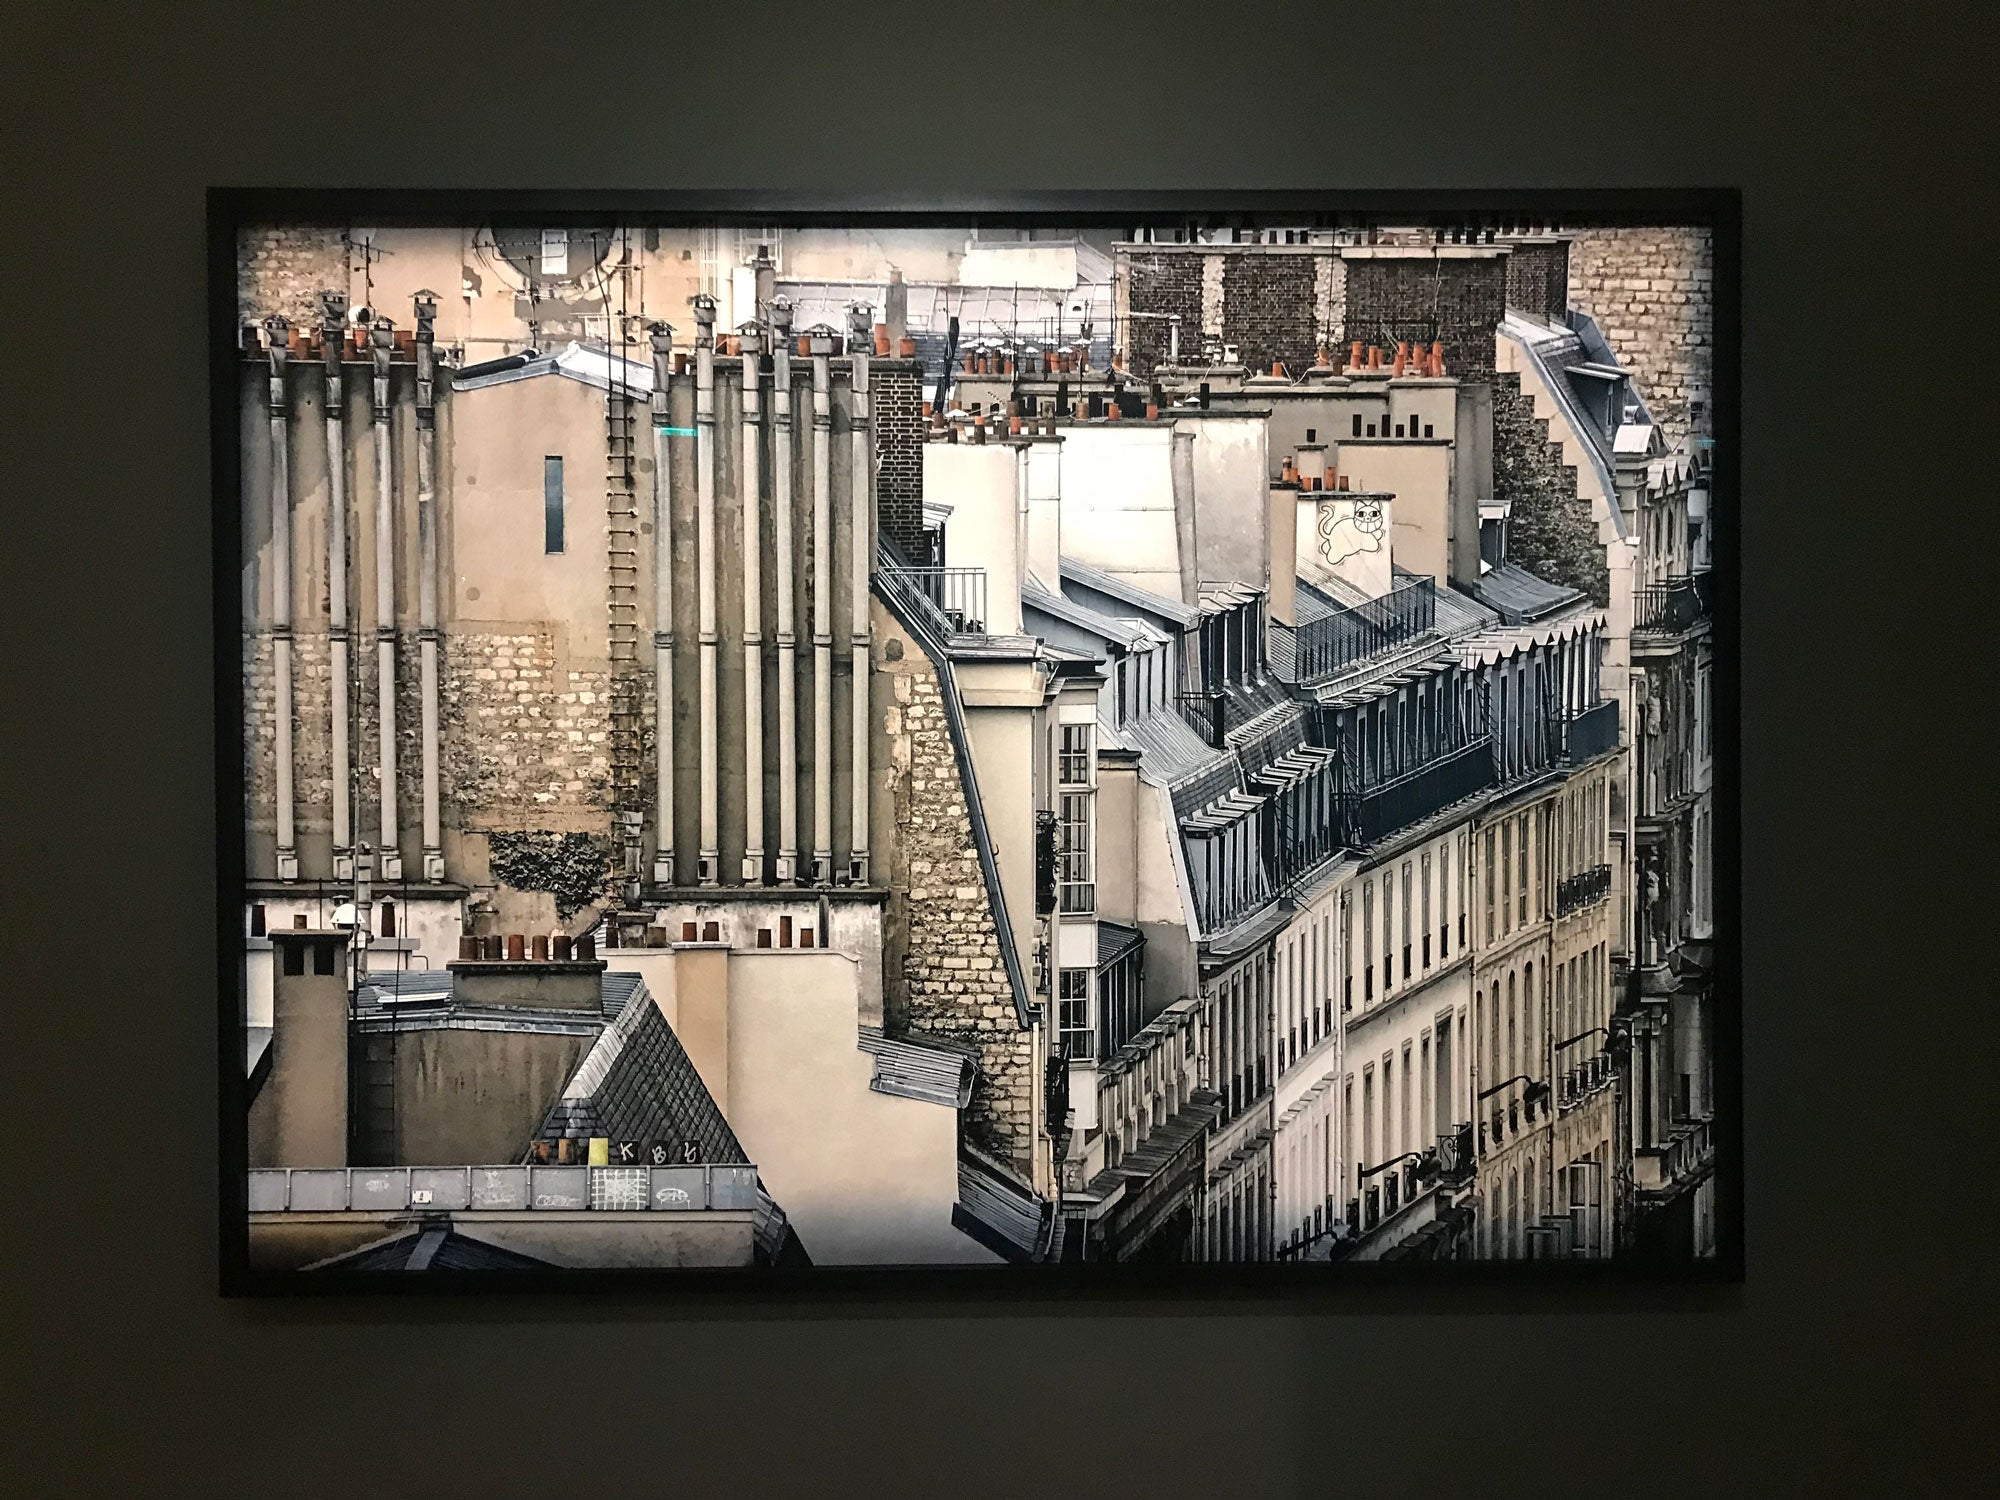 Michael Wolf exhibition Life in the cities at Fondazione Stelline